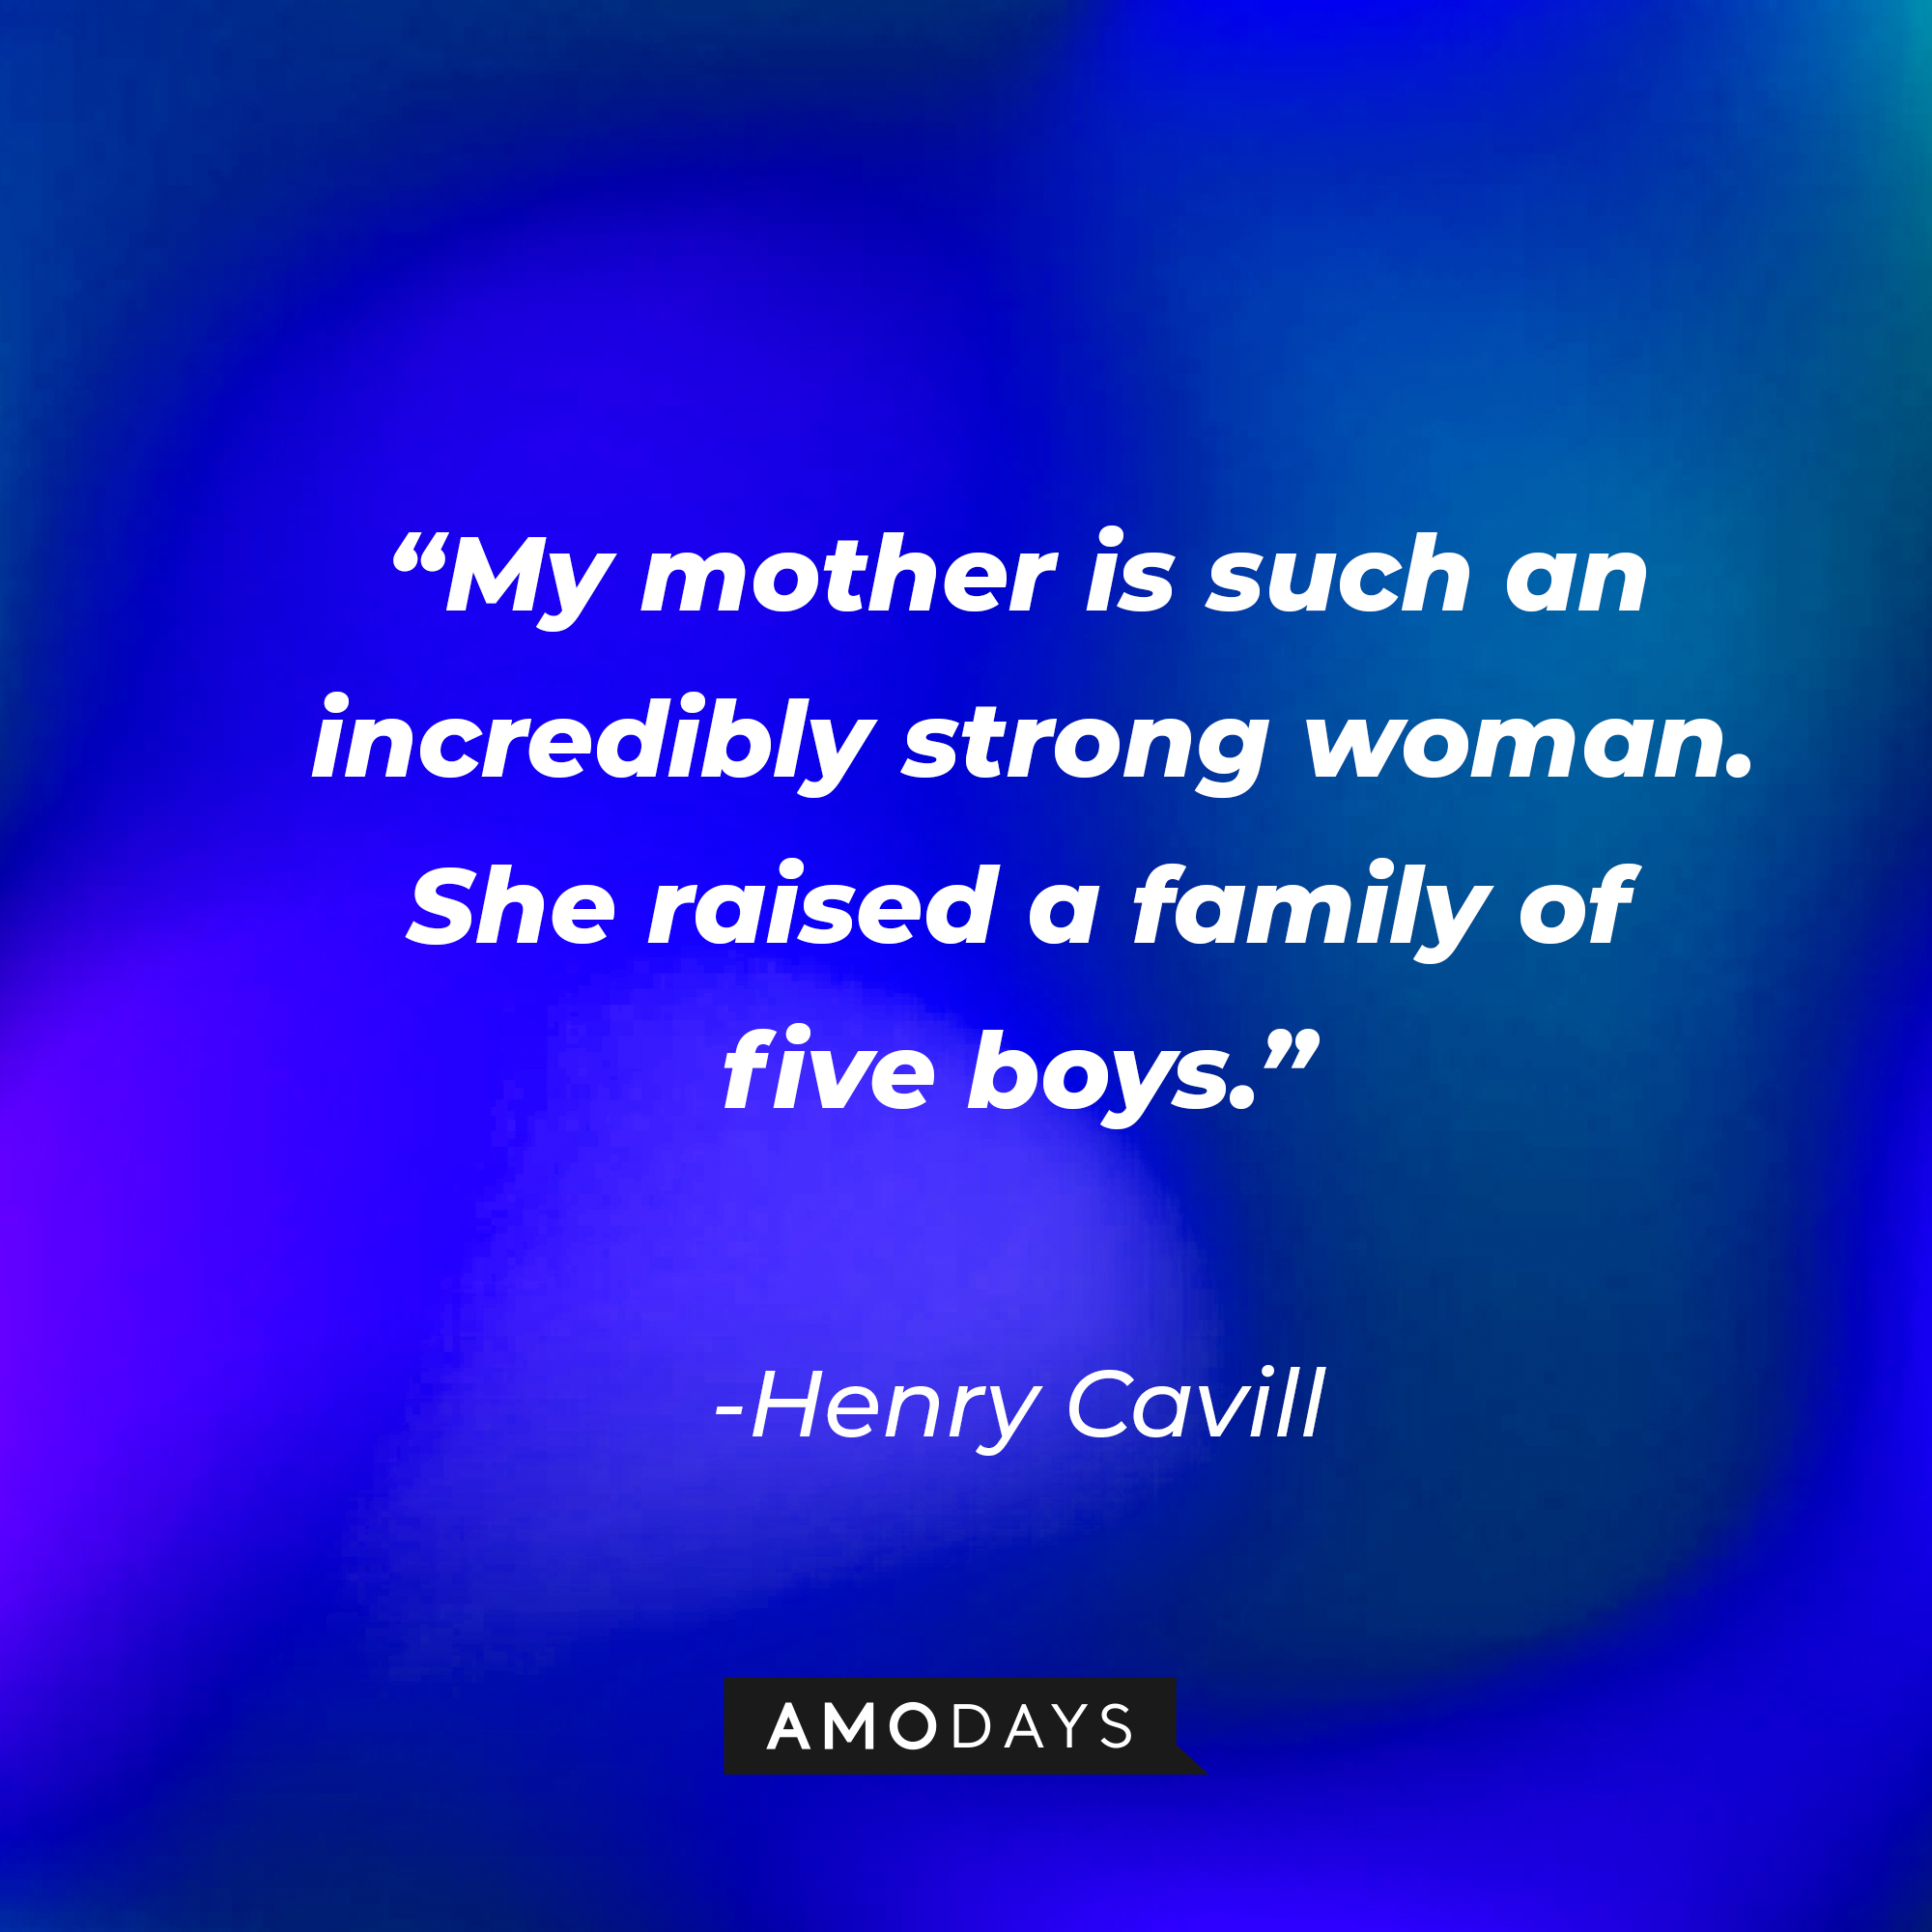 Henry Cavill’s quote: "My mother is such an incredibly strong woman. She raised a family of five boys.” | Source: AmoDays